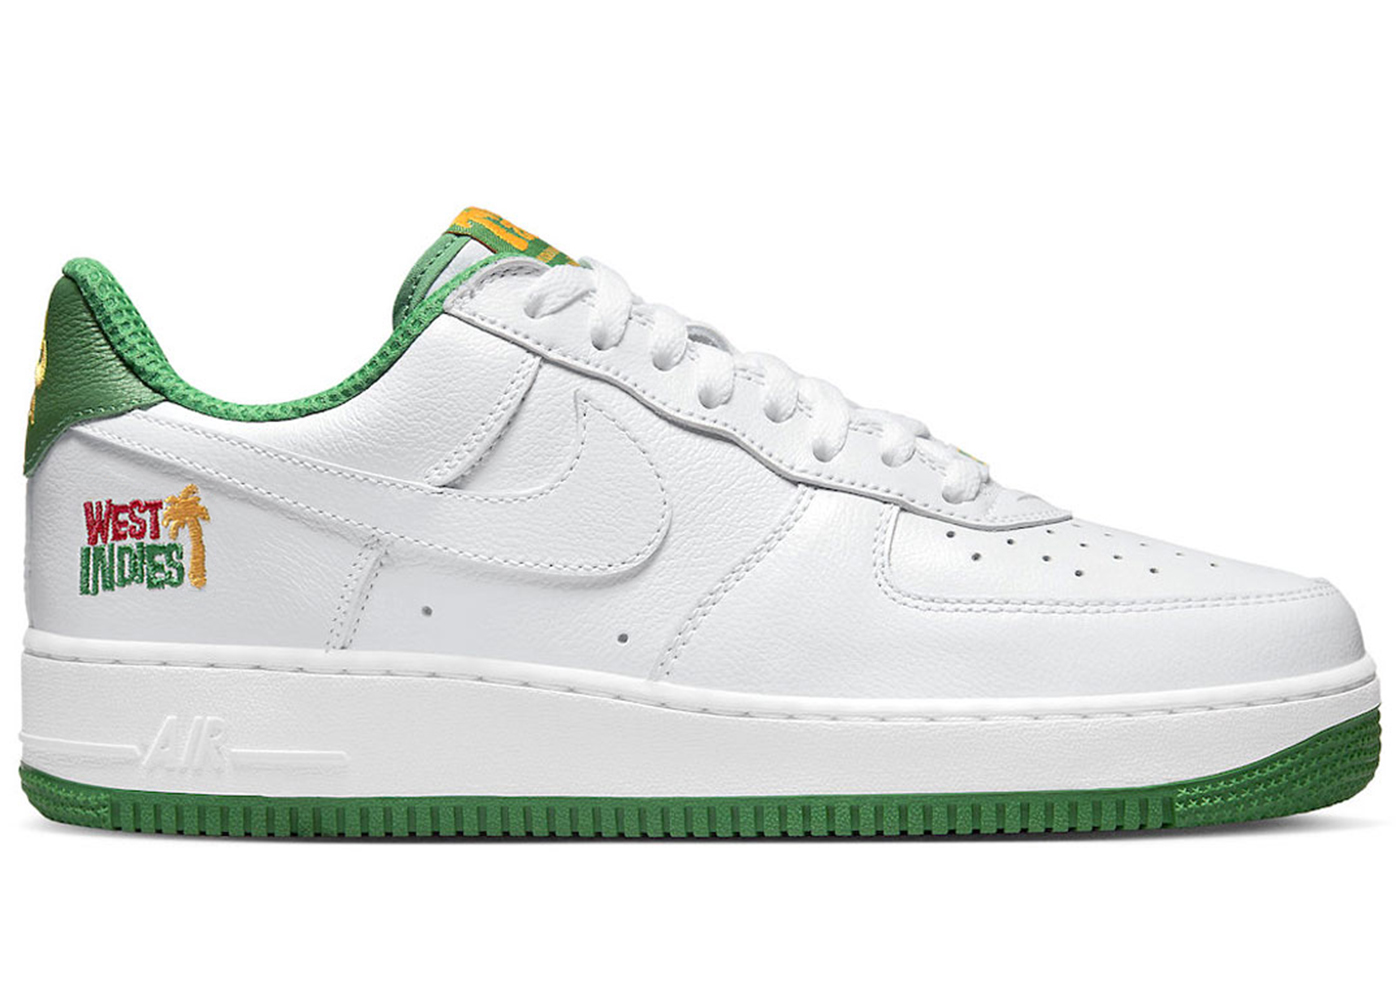 The Nike Air Force 1 West Indies against a white background